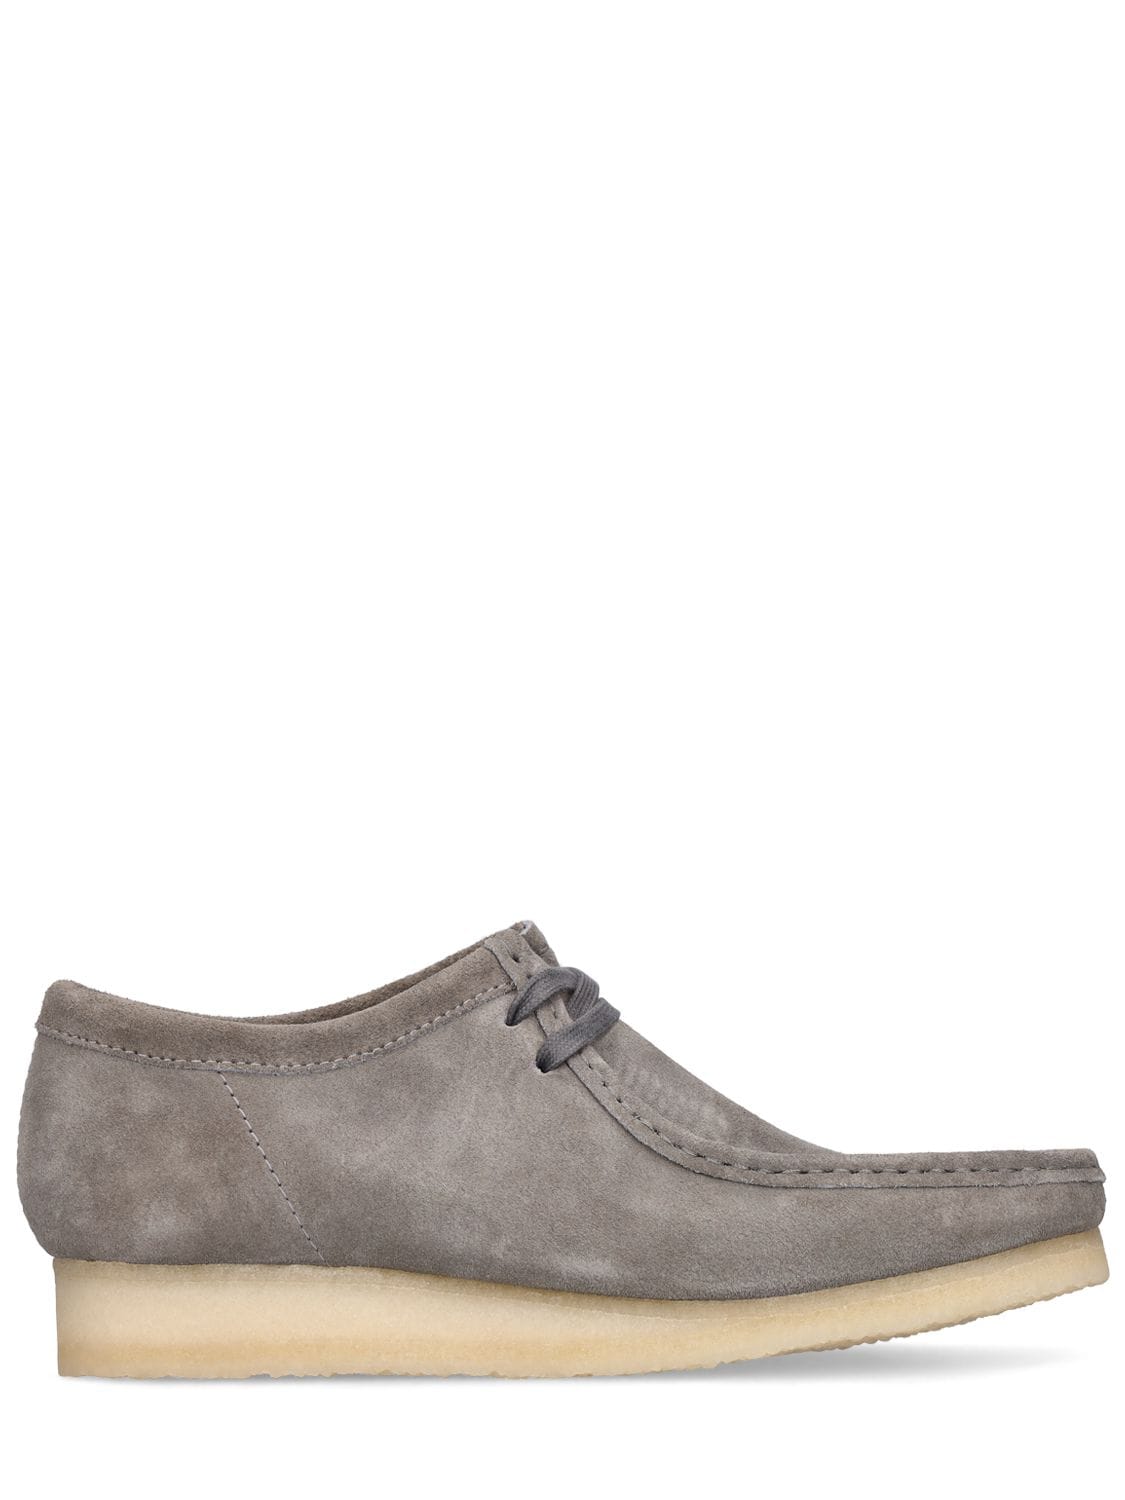 CLARKS ORIGINALS 30mm Wallabee Leather Lace-up Shoes